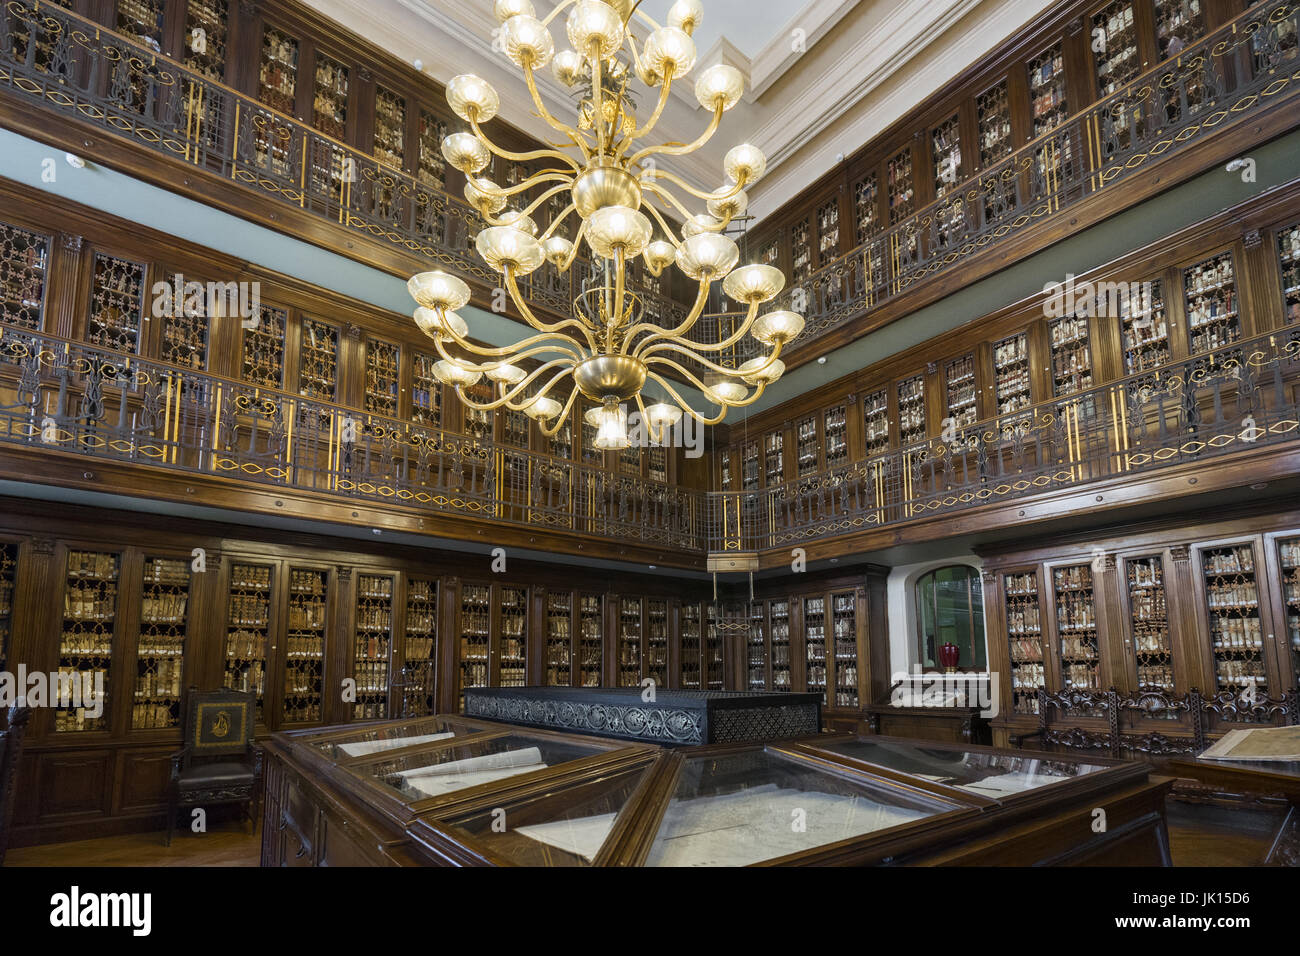 Marine ministry in Rome.  Detail of library. Interior. Italy, Rome, 2017 Stock Photo